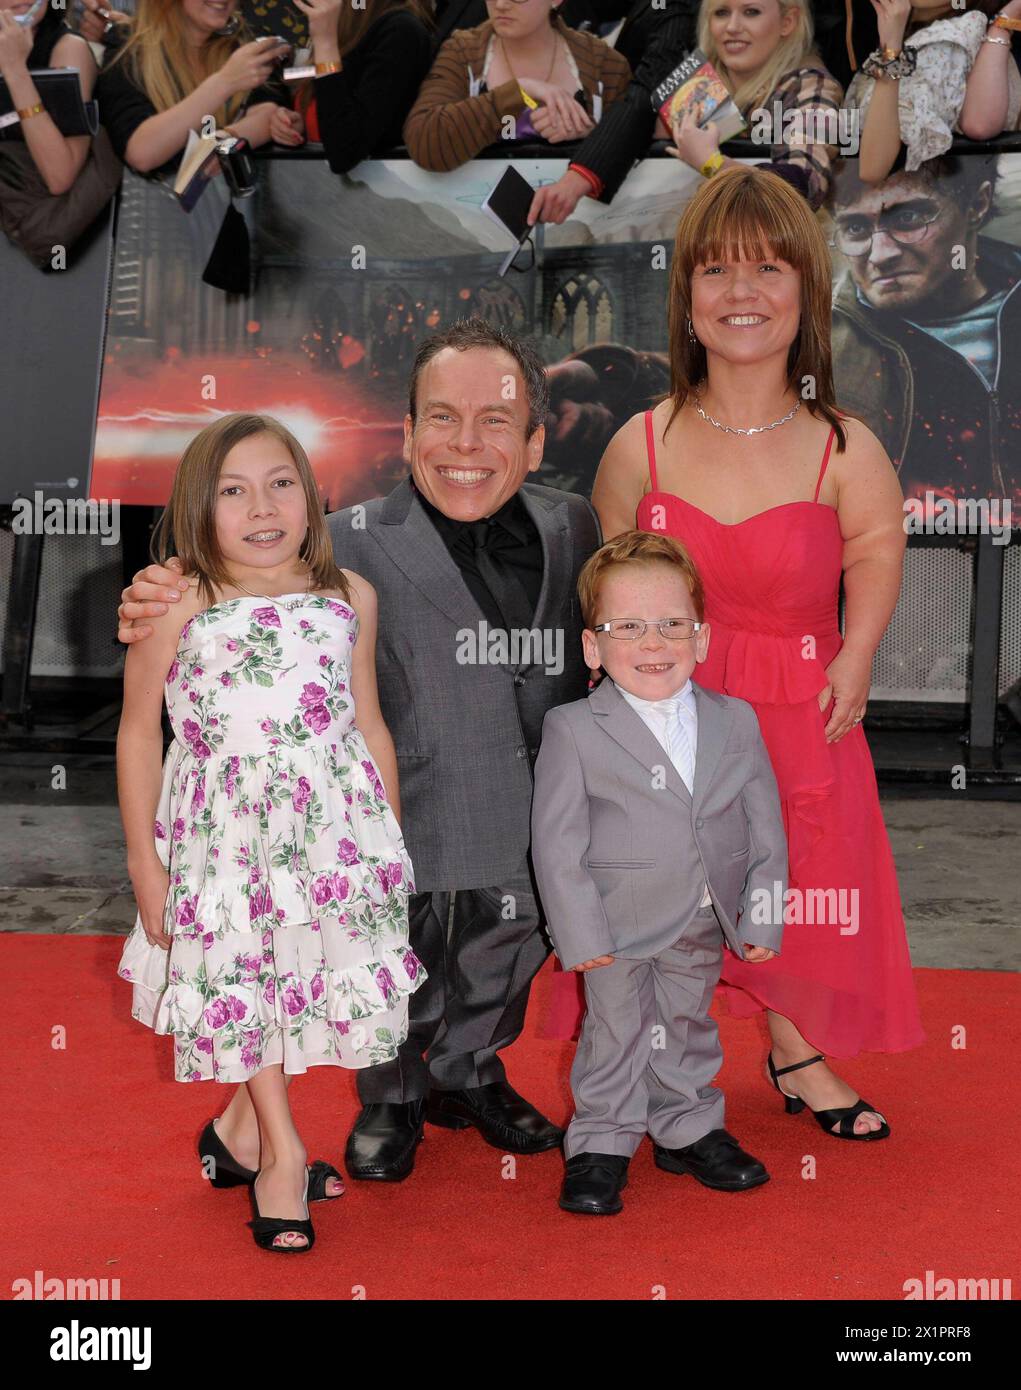 Warwick Davis wife Samantha dies aged 53 Warwick Davis wife Samantha tragically dies aged 53 Warwick Davis & family Harry Potter and the Deathly Hallows - Part 2 world film premiere arrivals Trafalgar Square, London, England 7th July 2011 HP7 full length grey gray red suit kids children white CAP/PL Phil Loftus/ London Great Britain Copyright: xPhilxLoftus/CapitalxPicturesx Stock Photo